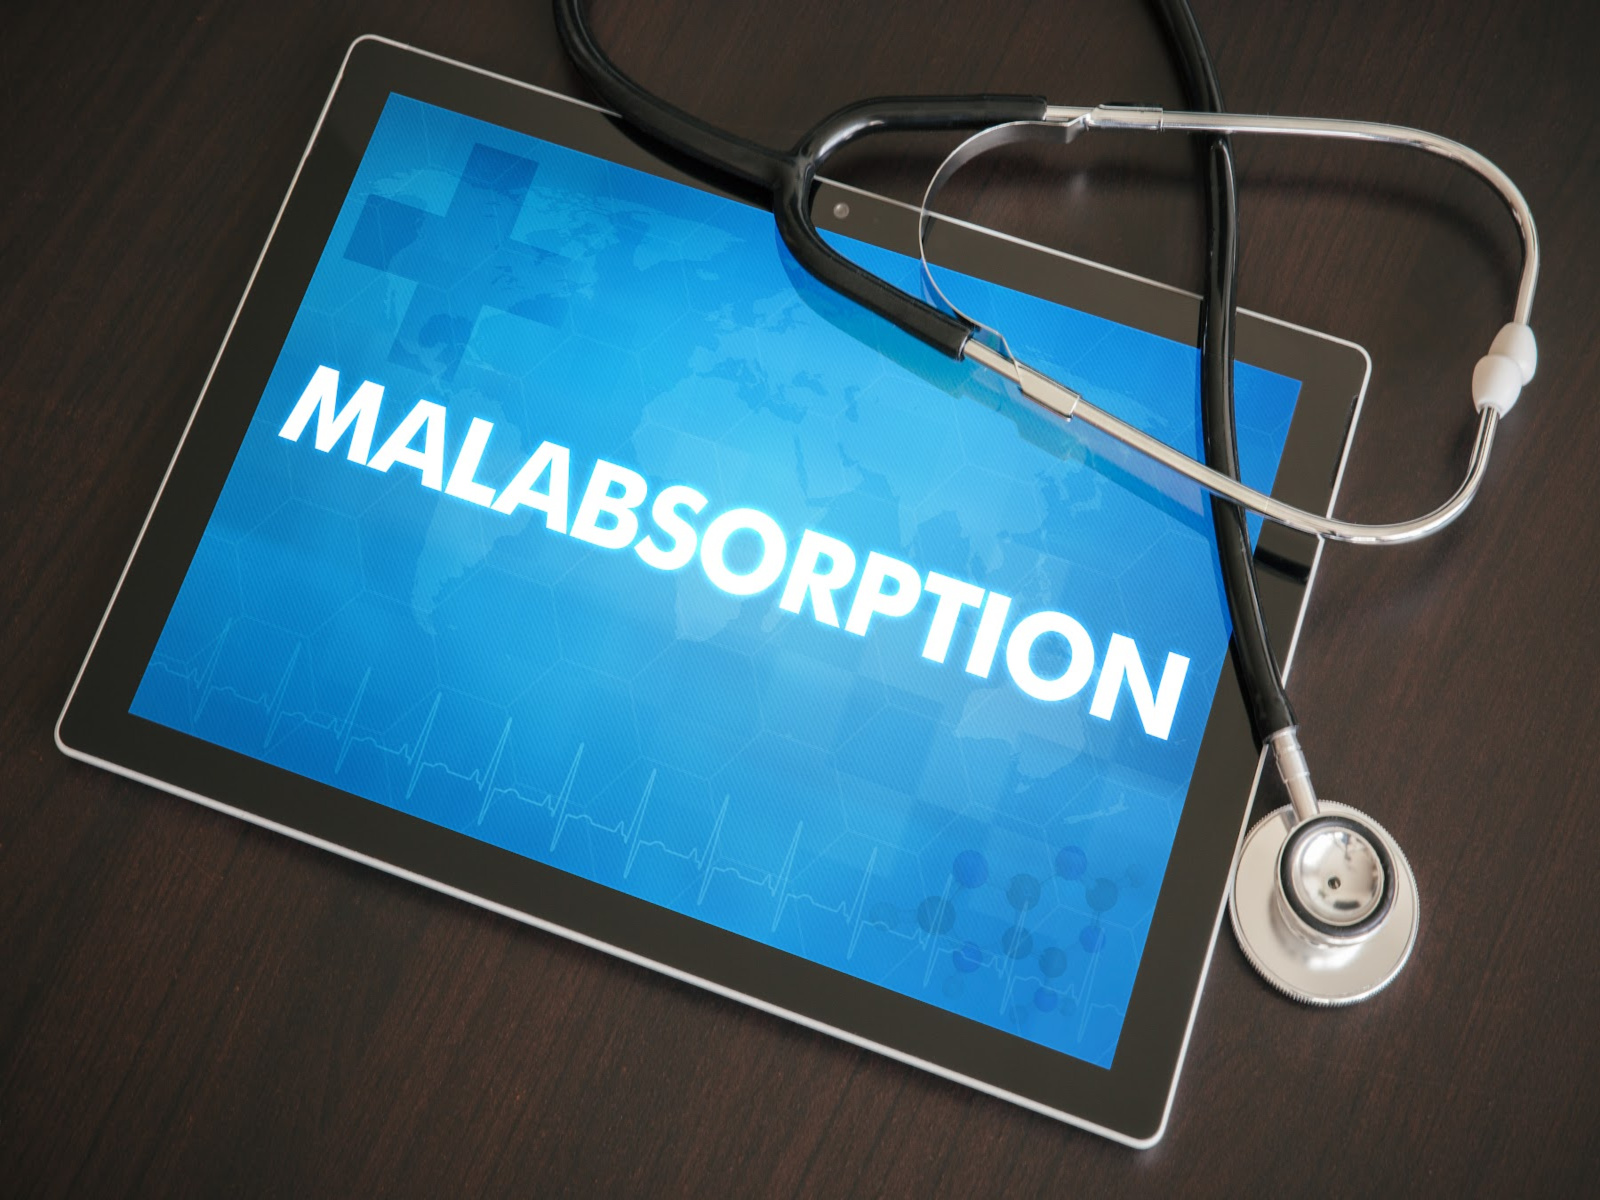 What causes malabsorption?